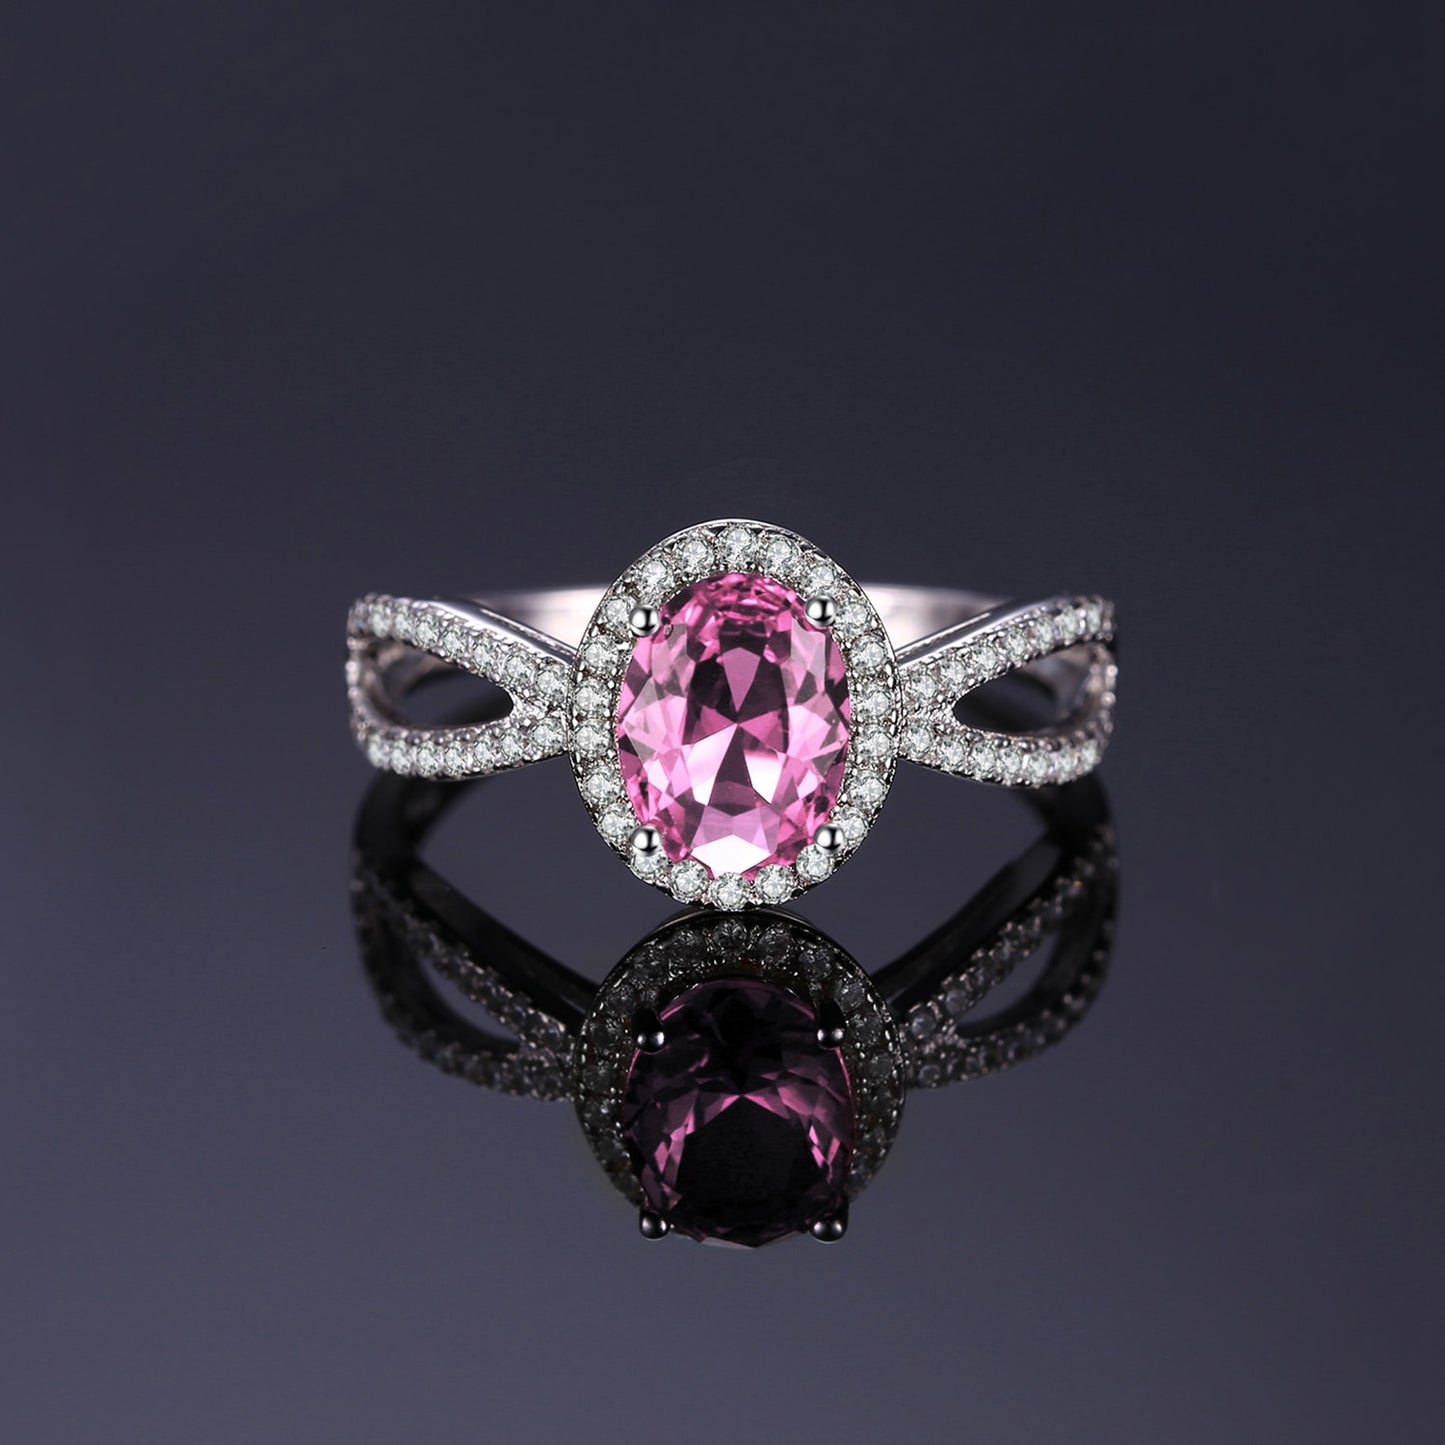 Oval 1.7ct Created Pink Sapphire 925 Sterling Silver Halo Women's Ring